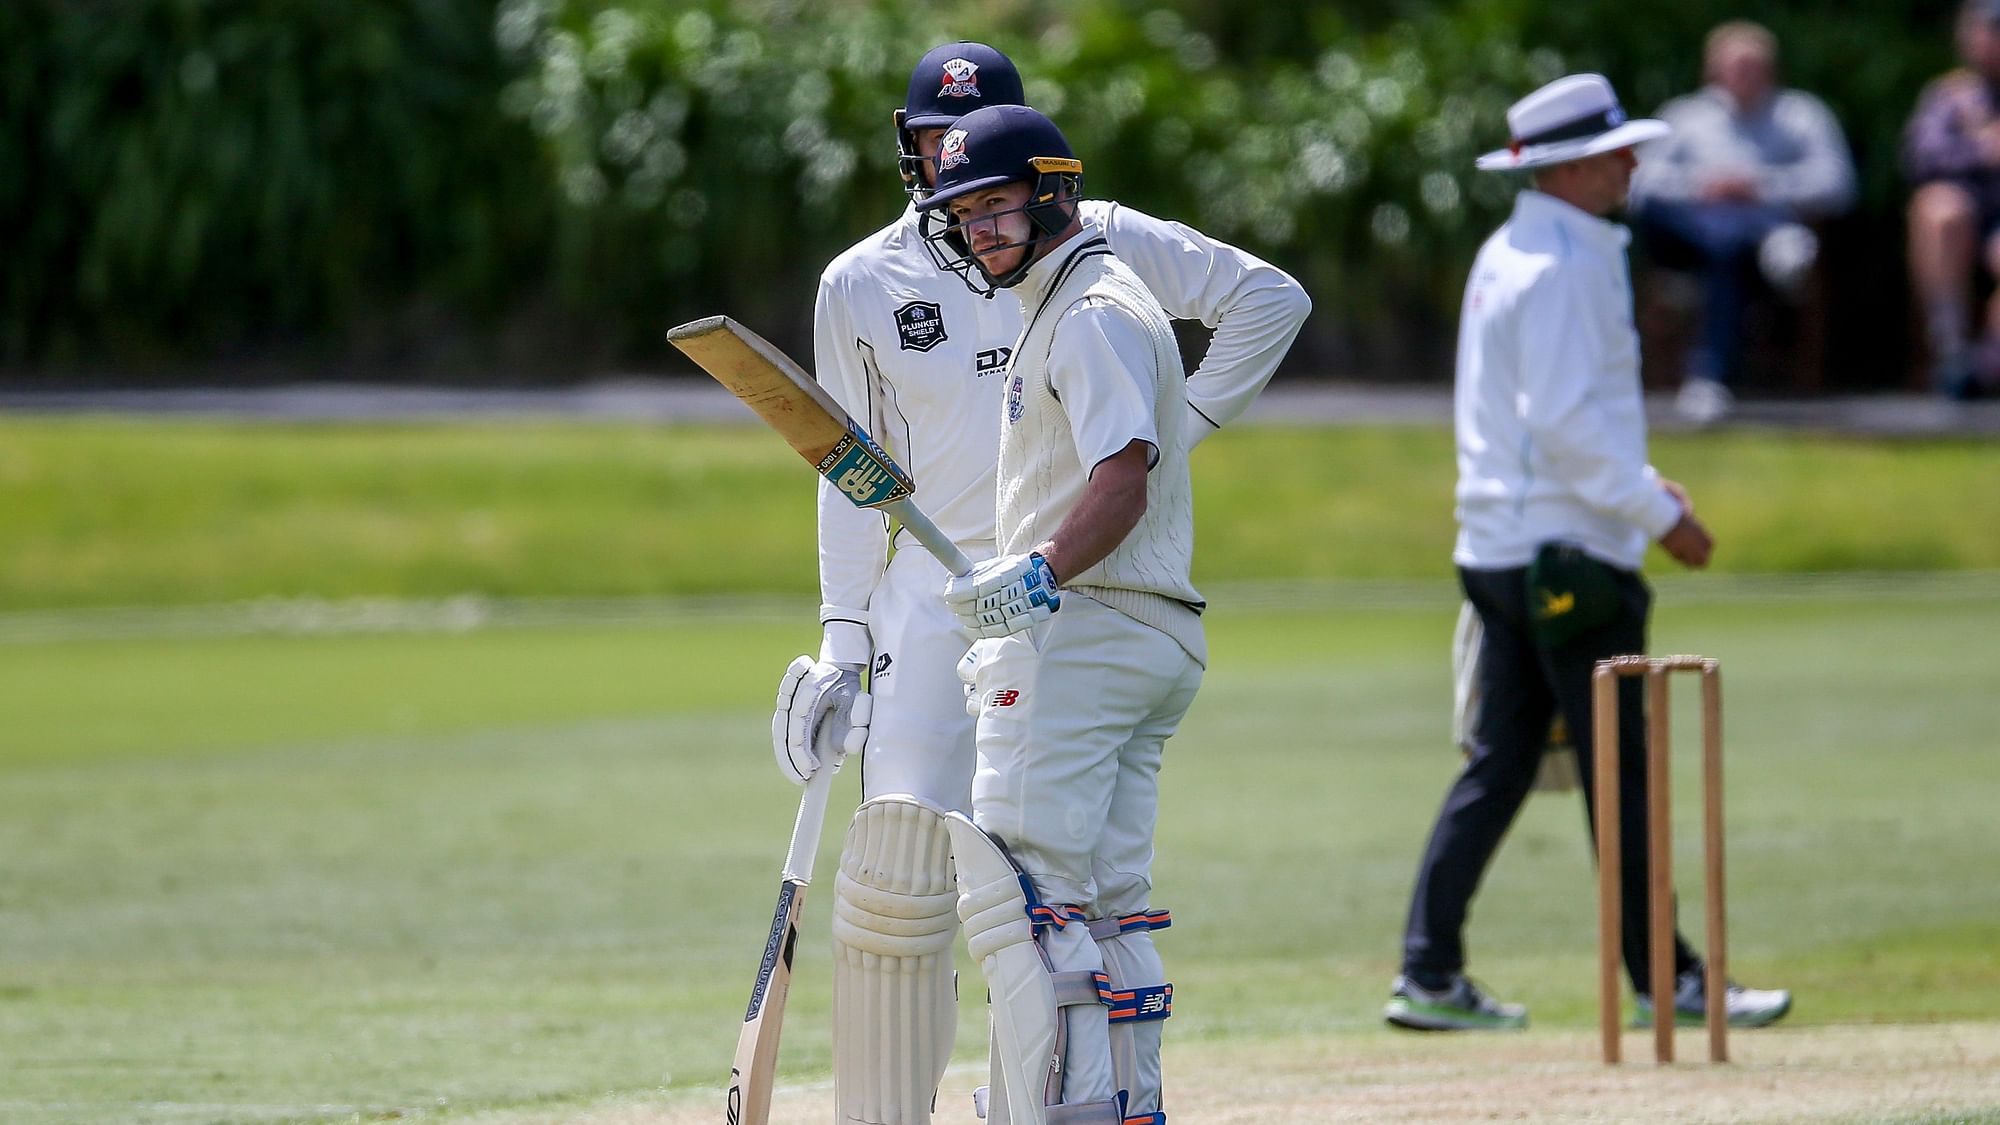 With doubts over Kane Williamson and Henry Nicholls’ participation due to illness in the third and final Test against Australia, New Zealand have made an eleventh hour call to uncapped batsman Glenn Phillips for the match beginning on Friday, 3 January.